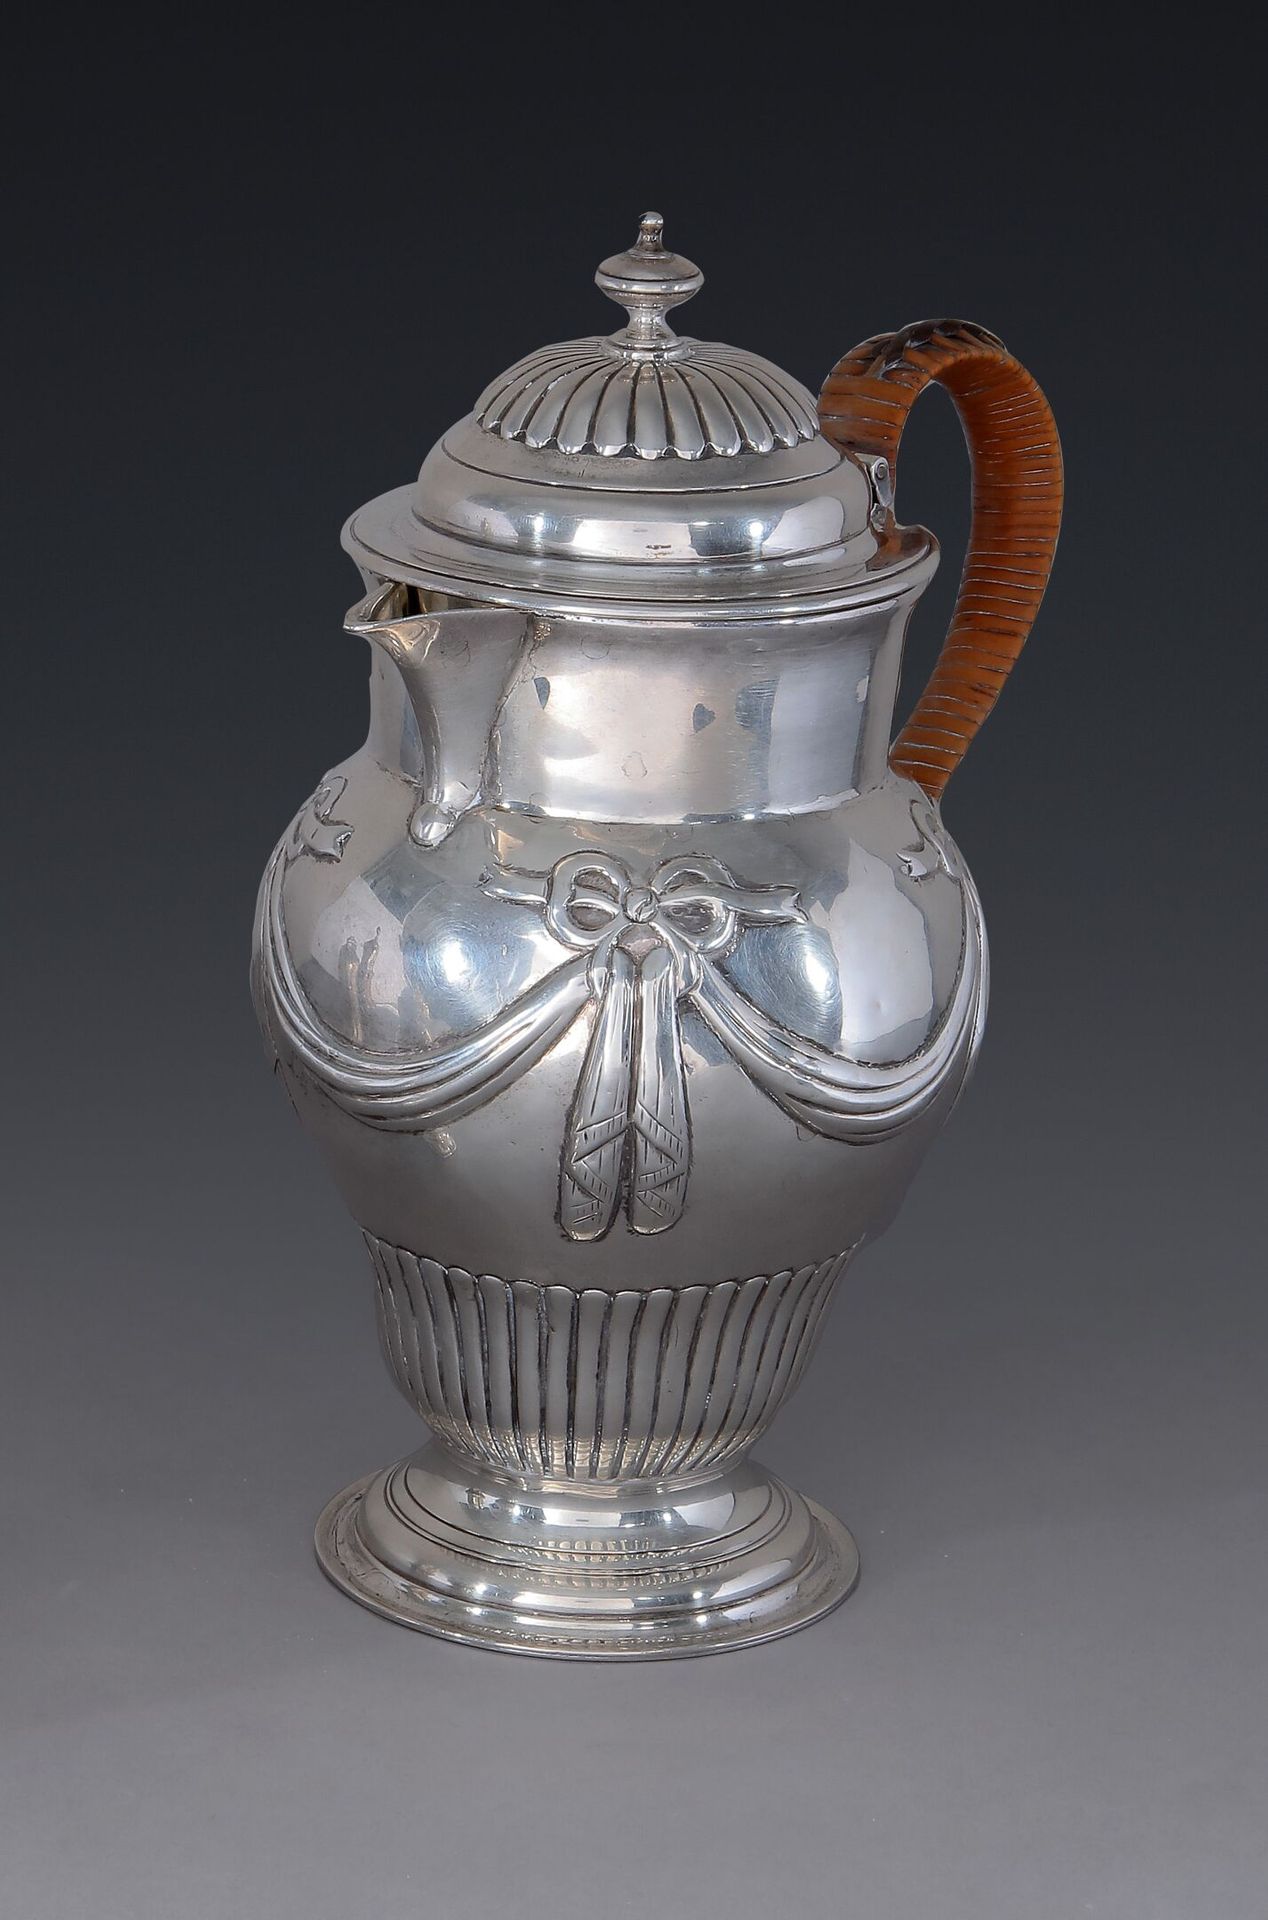 Null LONDON, 18th century
A baluster-shaped silver coffee pot on a pedestal deco&hellip;